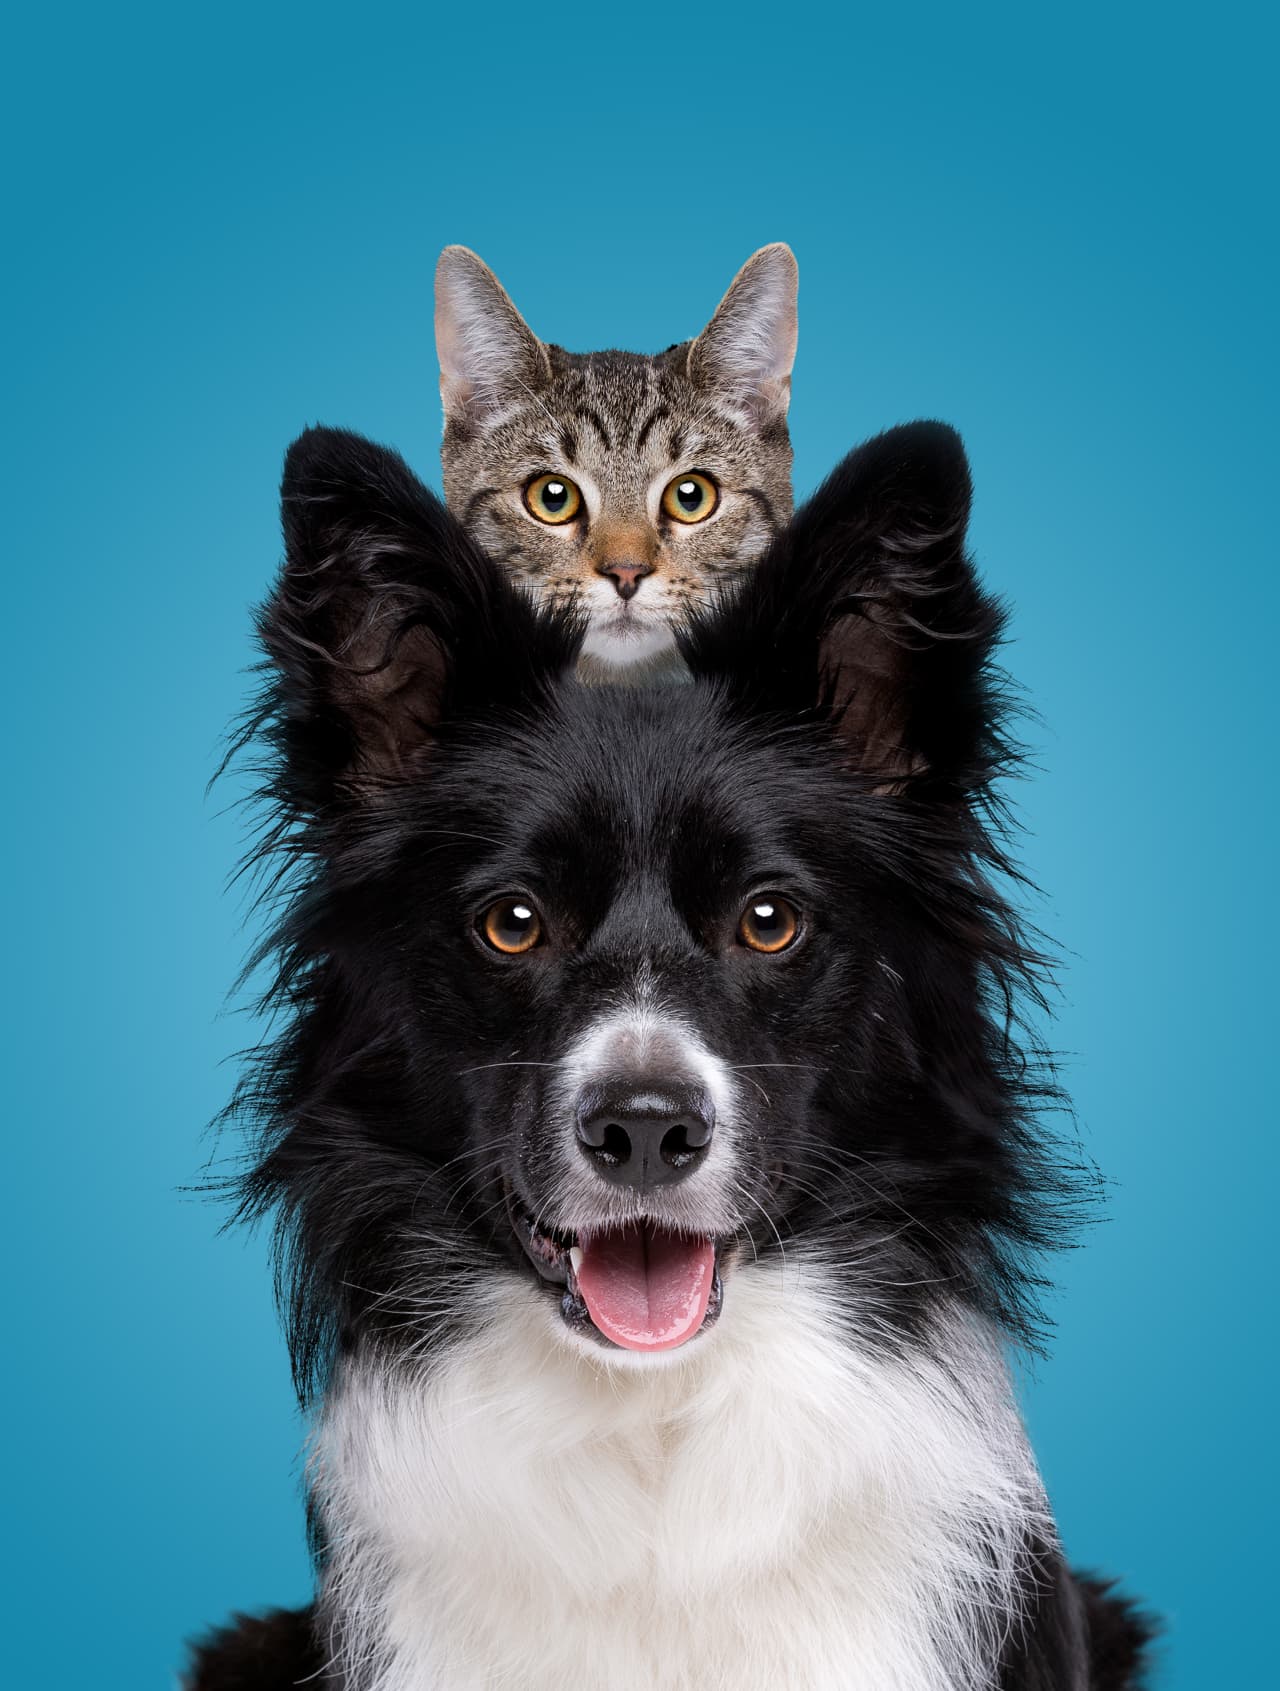 Cat Vs. Dog: Which One Makes Better Financial Sense?